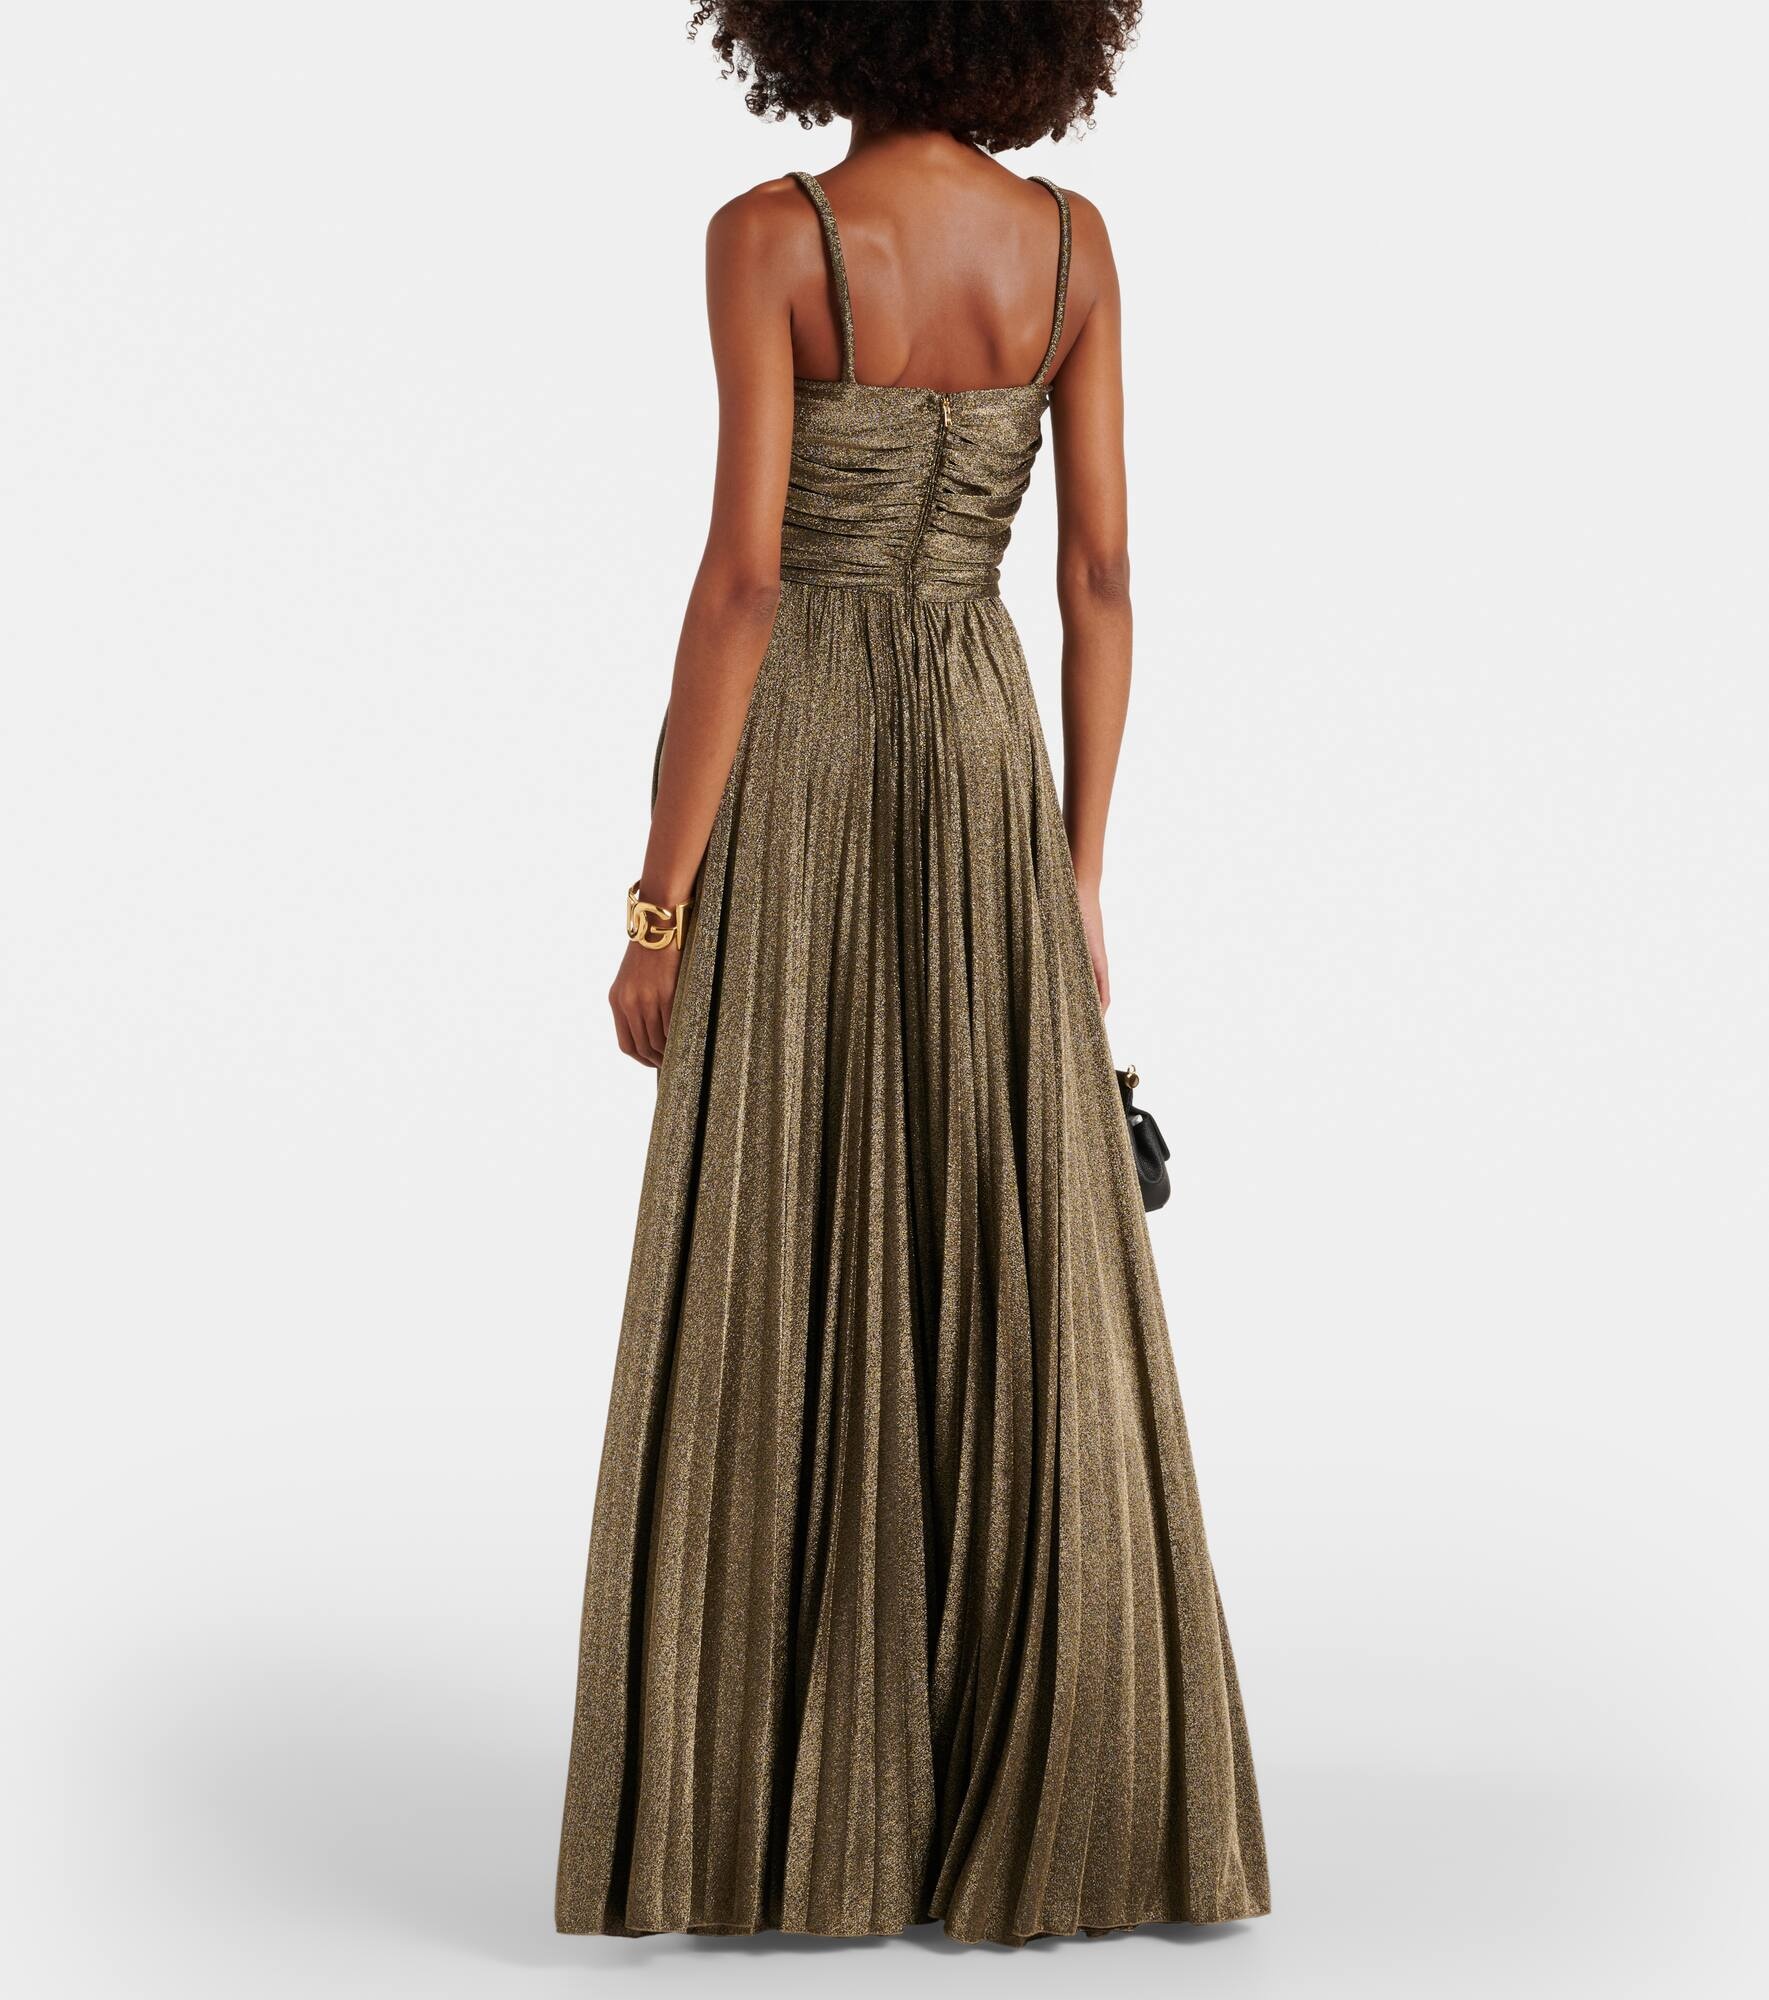 Ruched metallic gown - 3